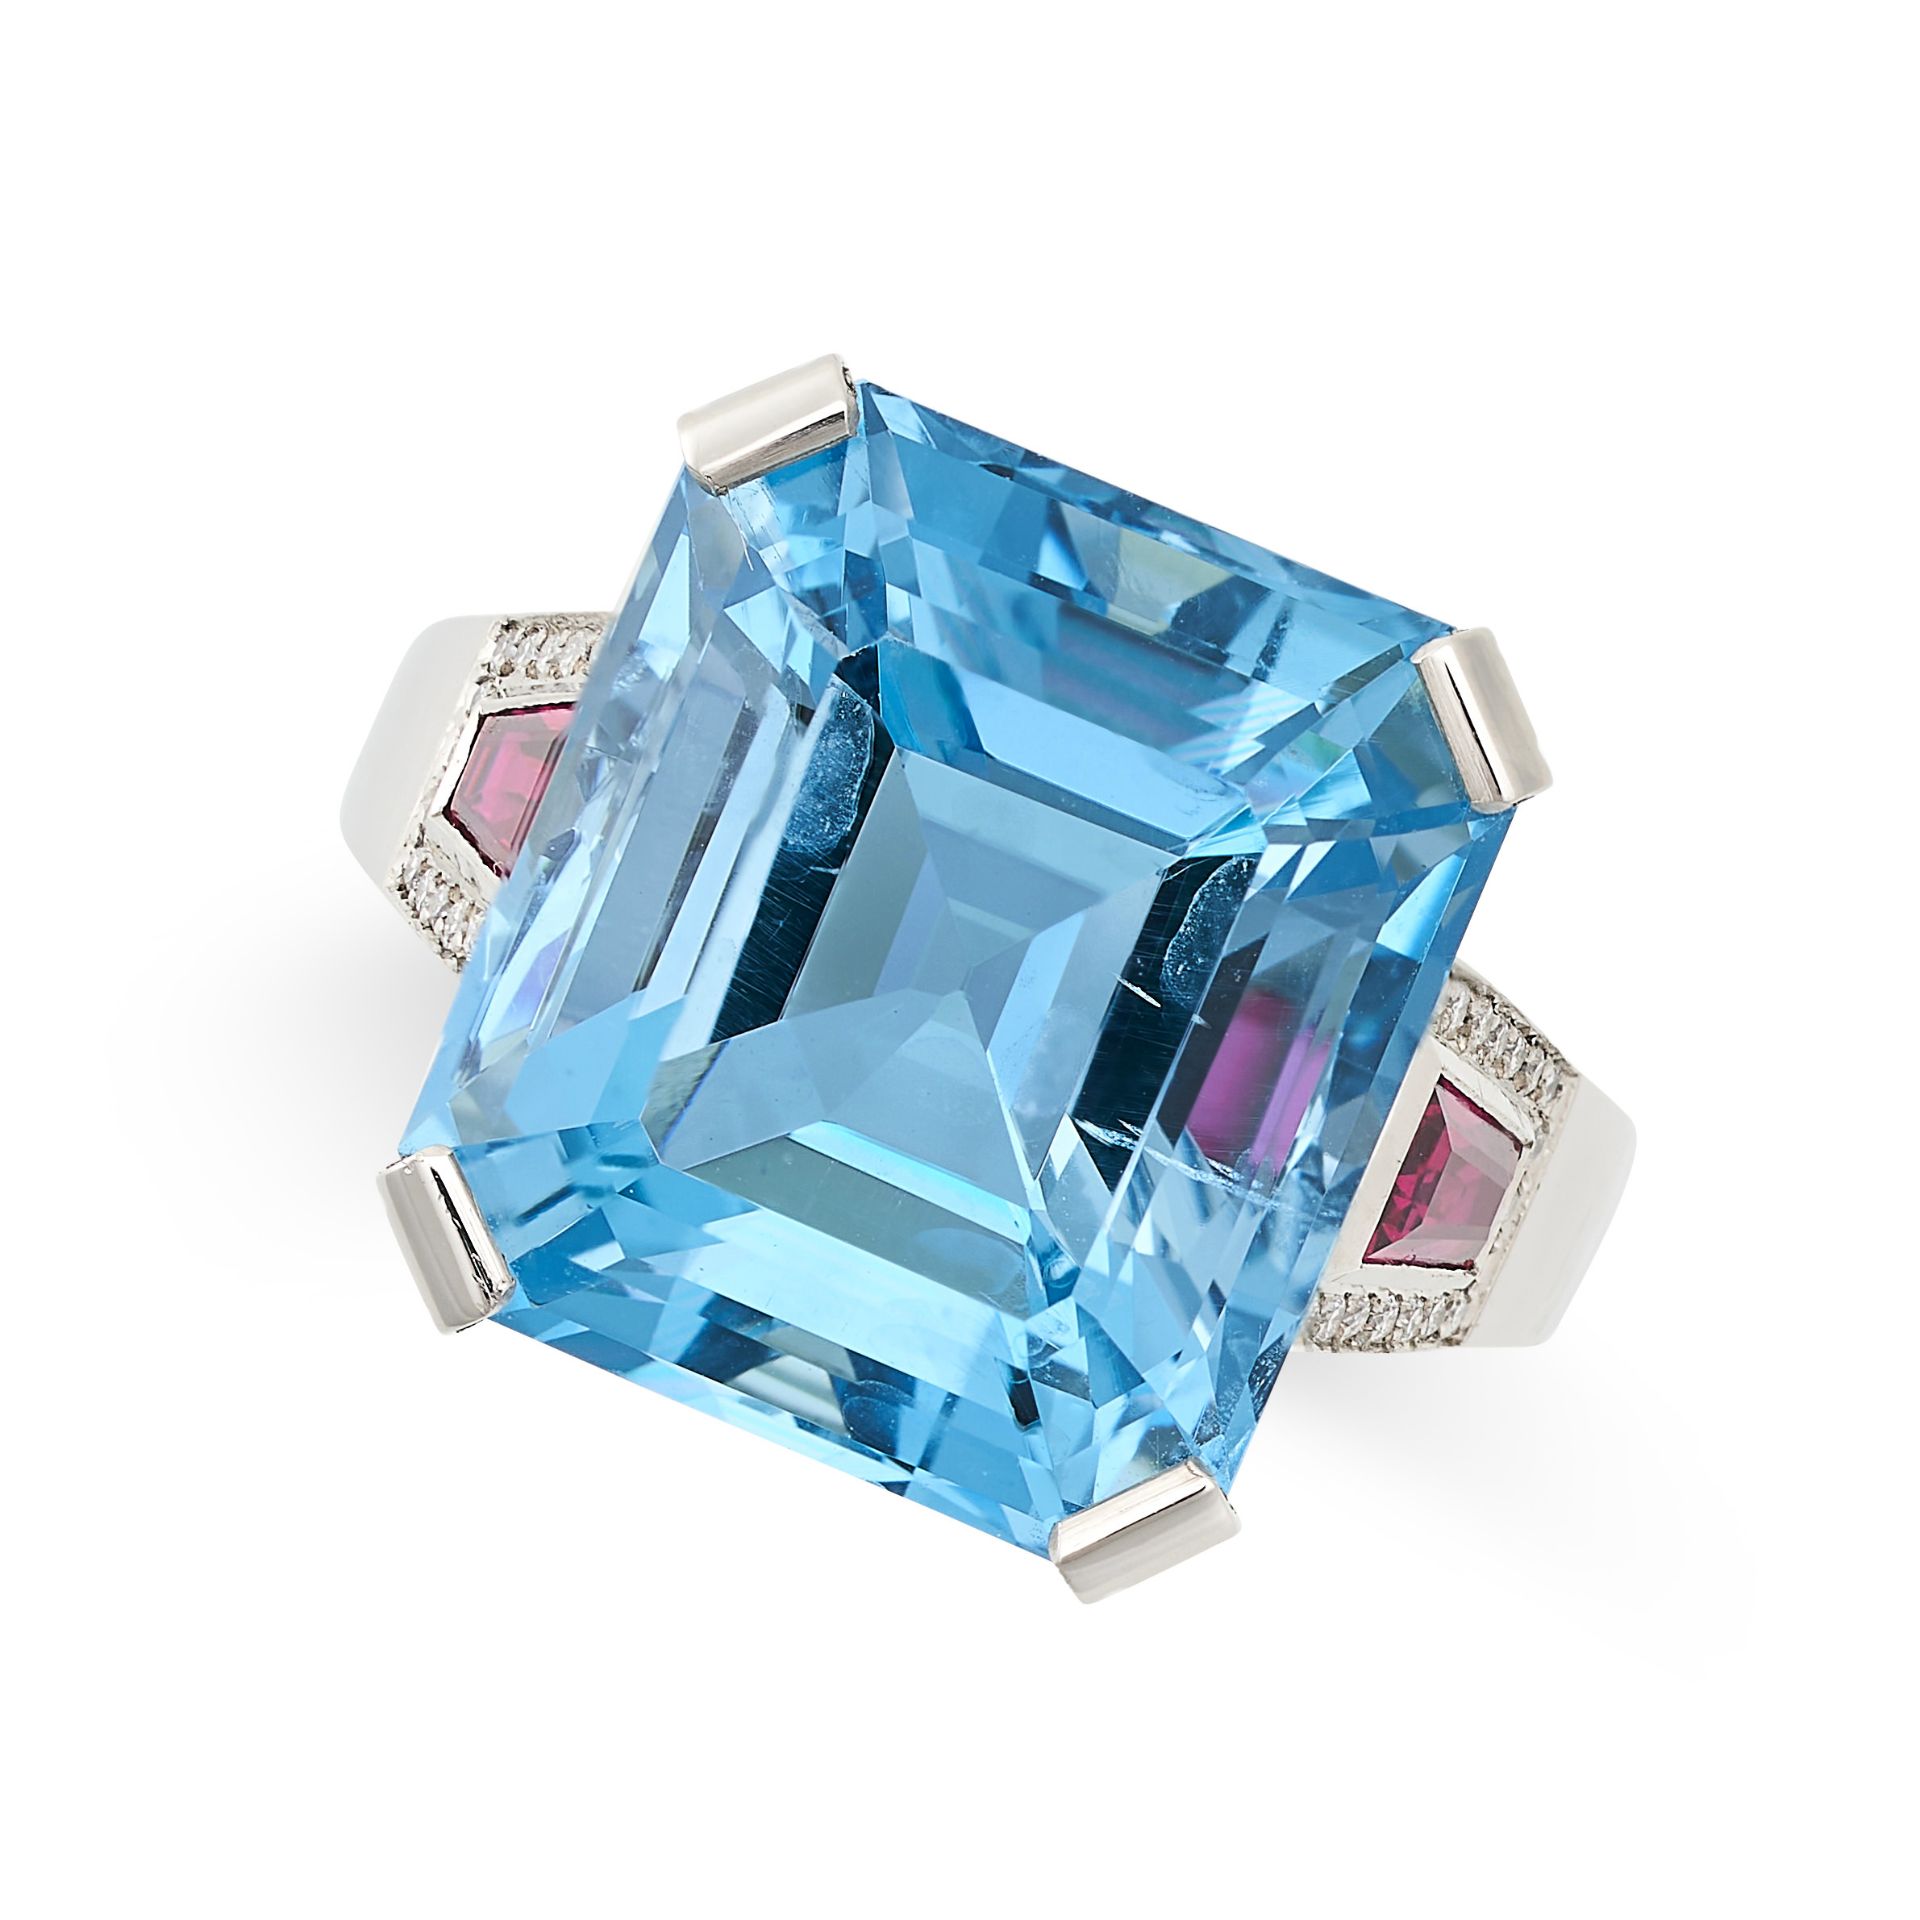 AN AQUAMARINE, RUBY AND DIAMOND COCKTAIL RING in platinum, set with an emerald cut aquamarine of